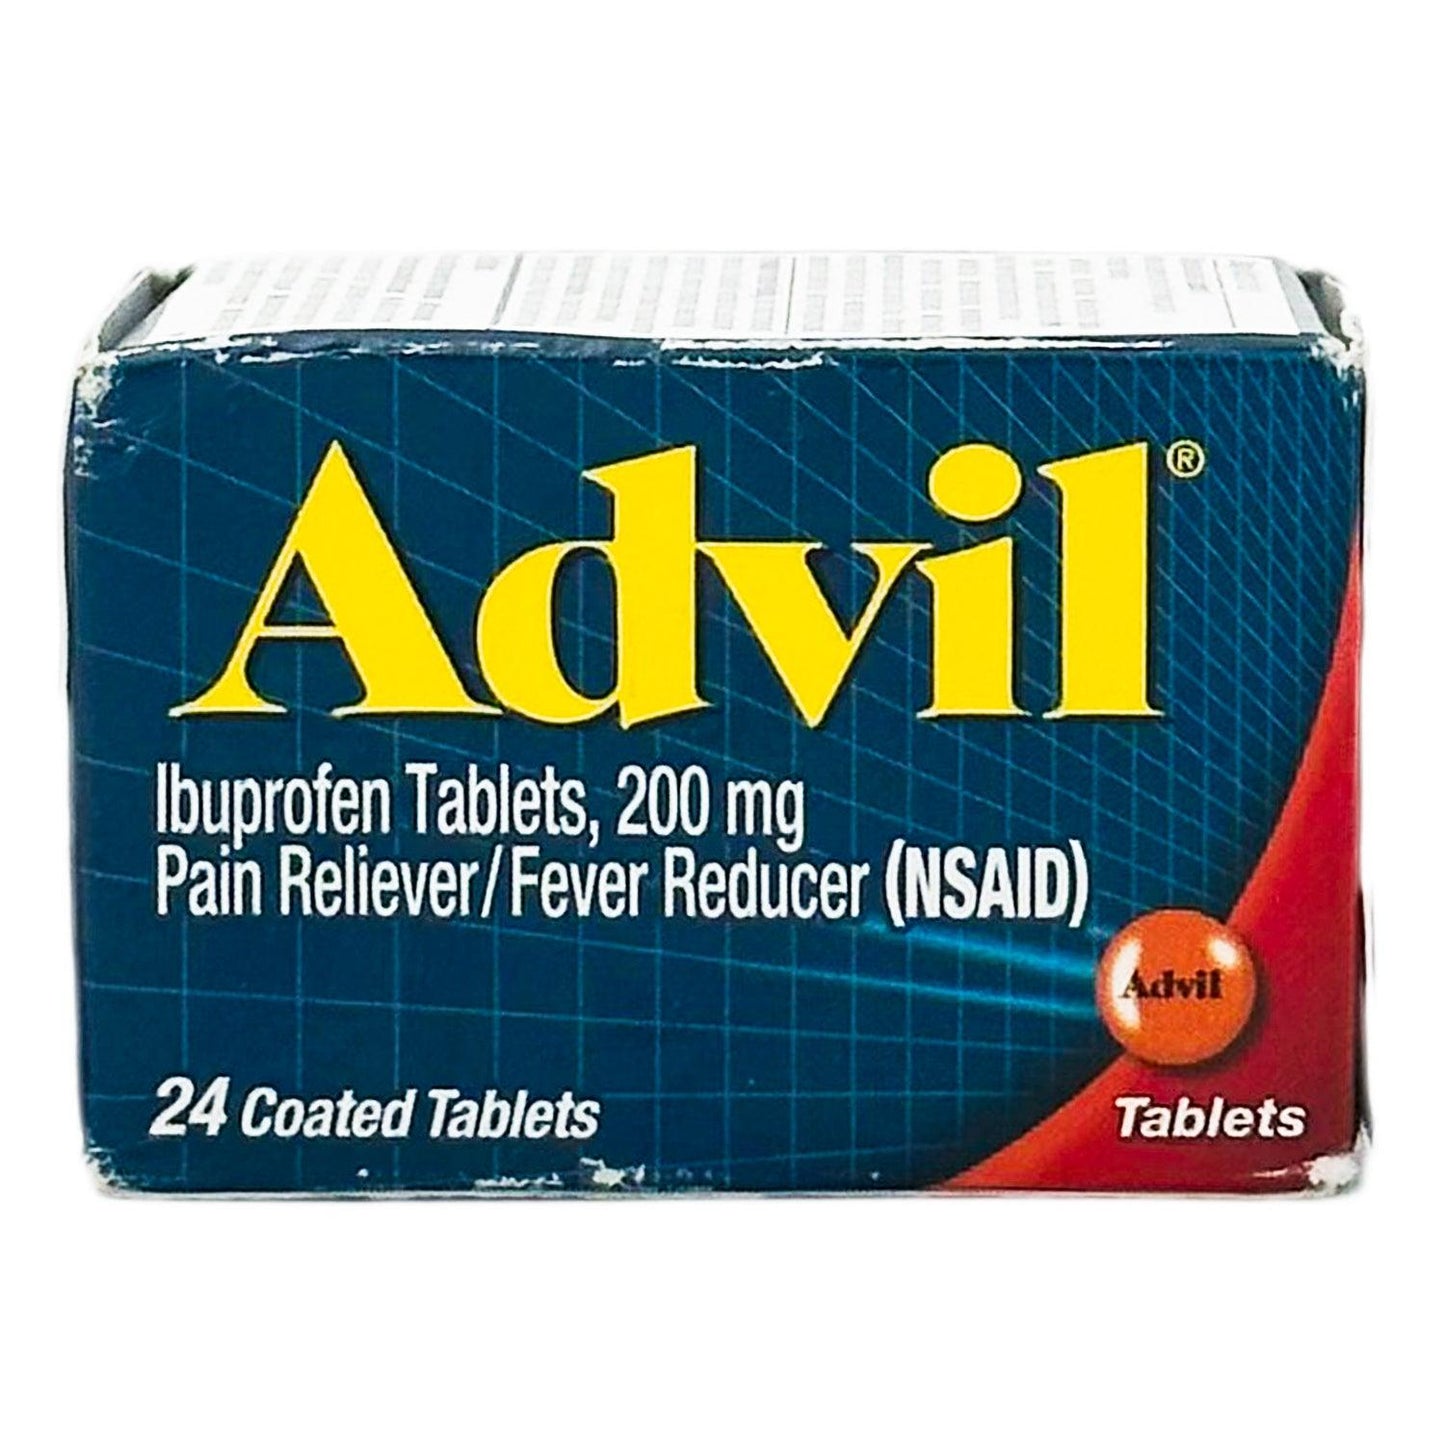 advil | ibuprofen tablets, 200 mg | 24 count | BEST BY 04/25 - Home Revival Shop